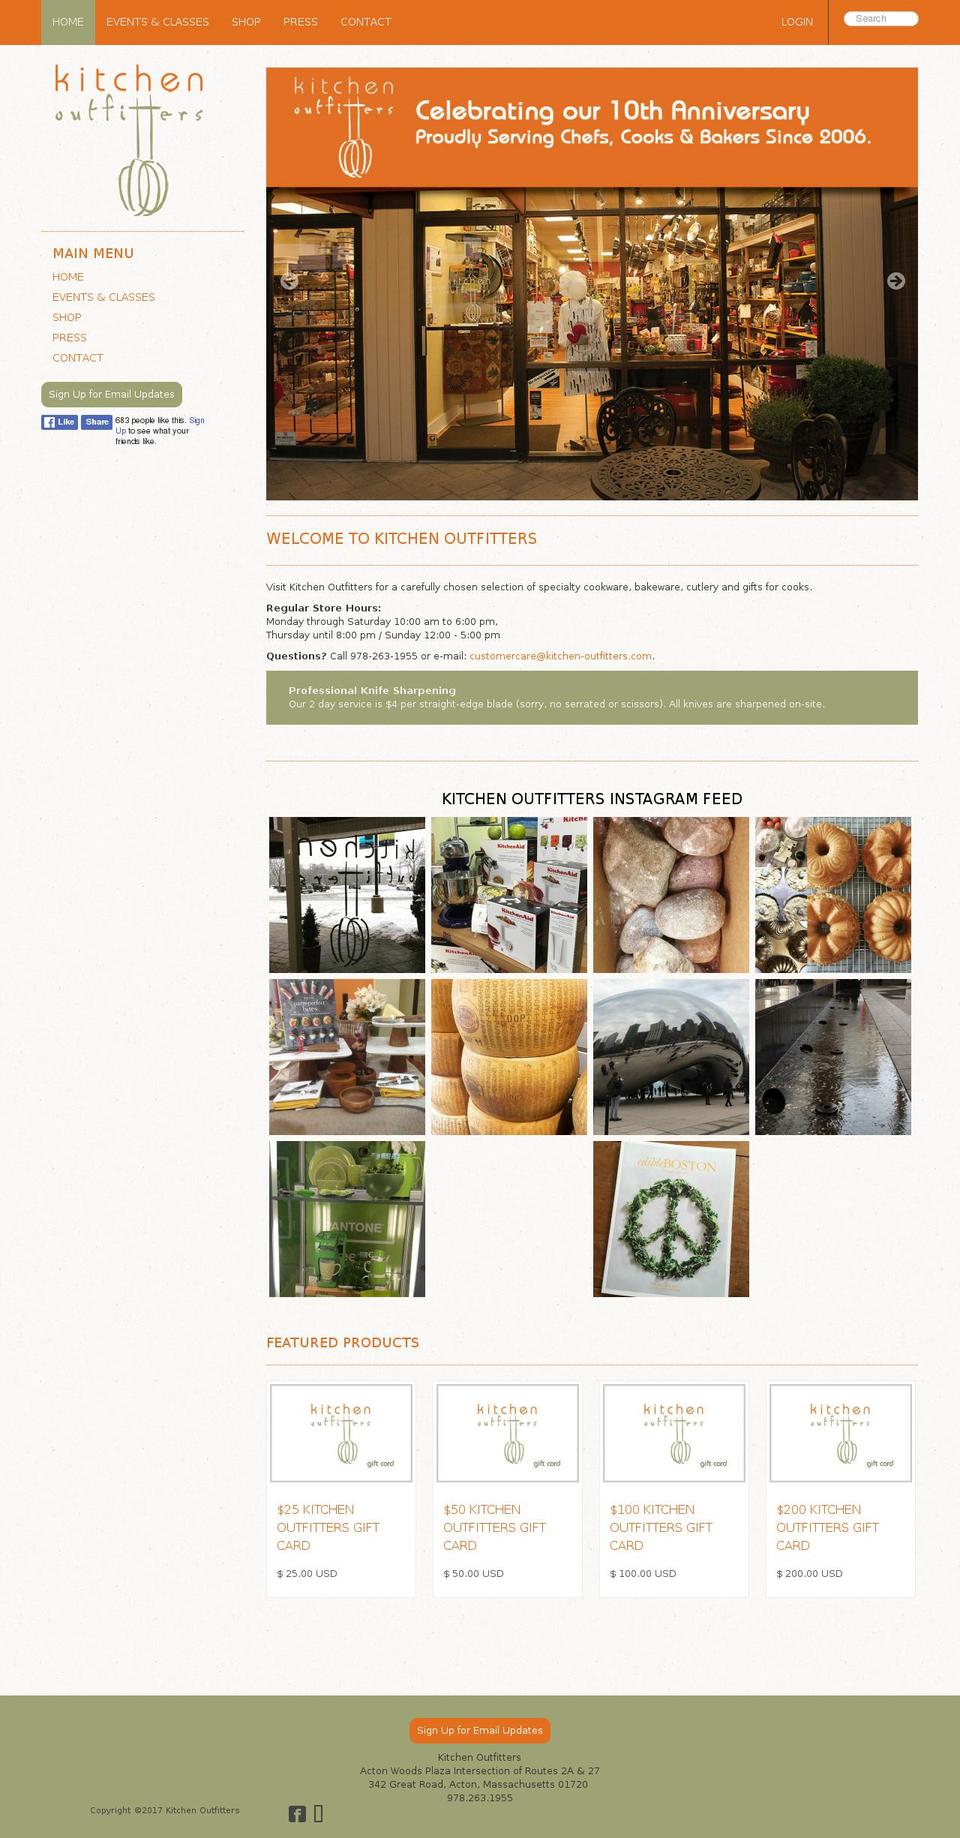 Emerge Shopify theme site example kitchen-outfitters.com